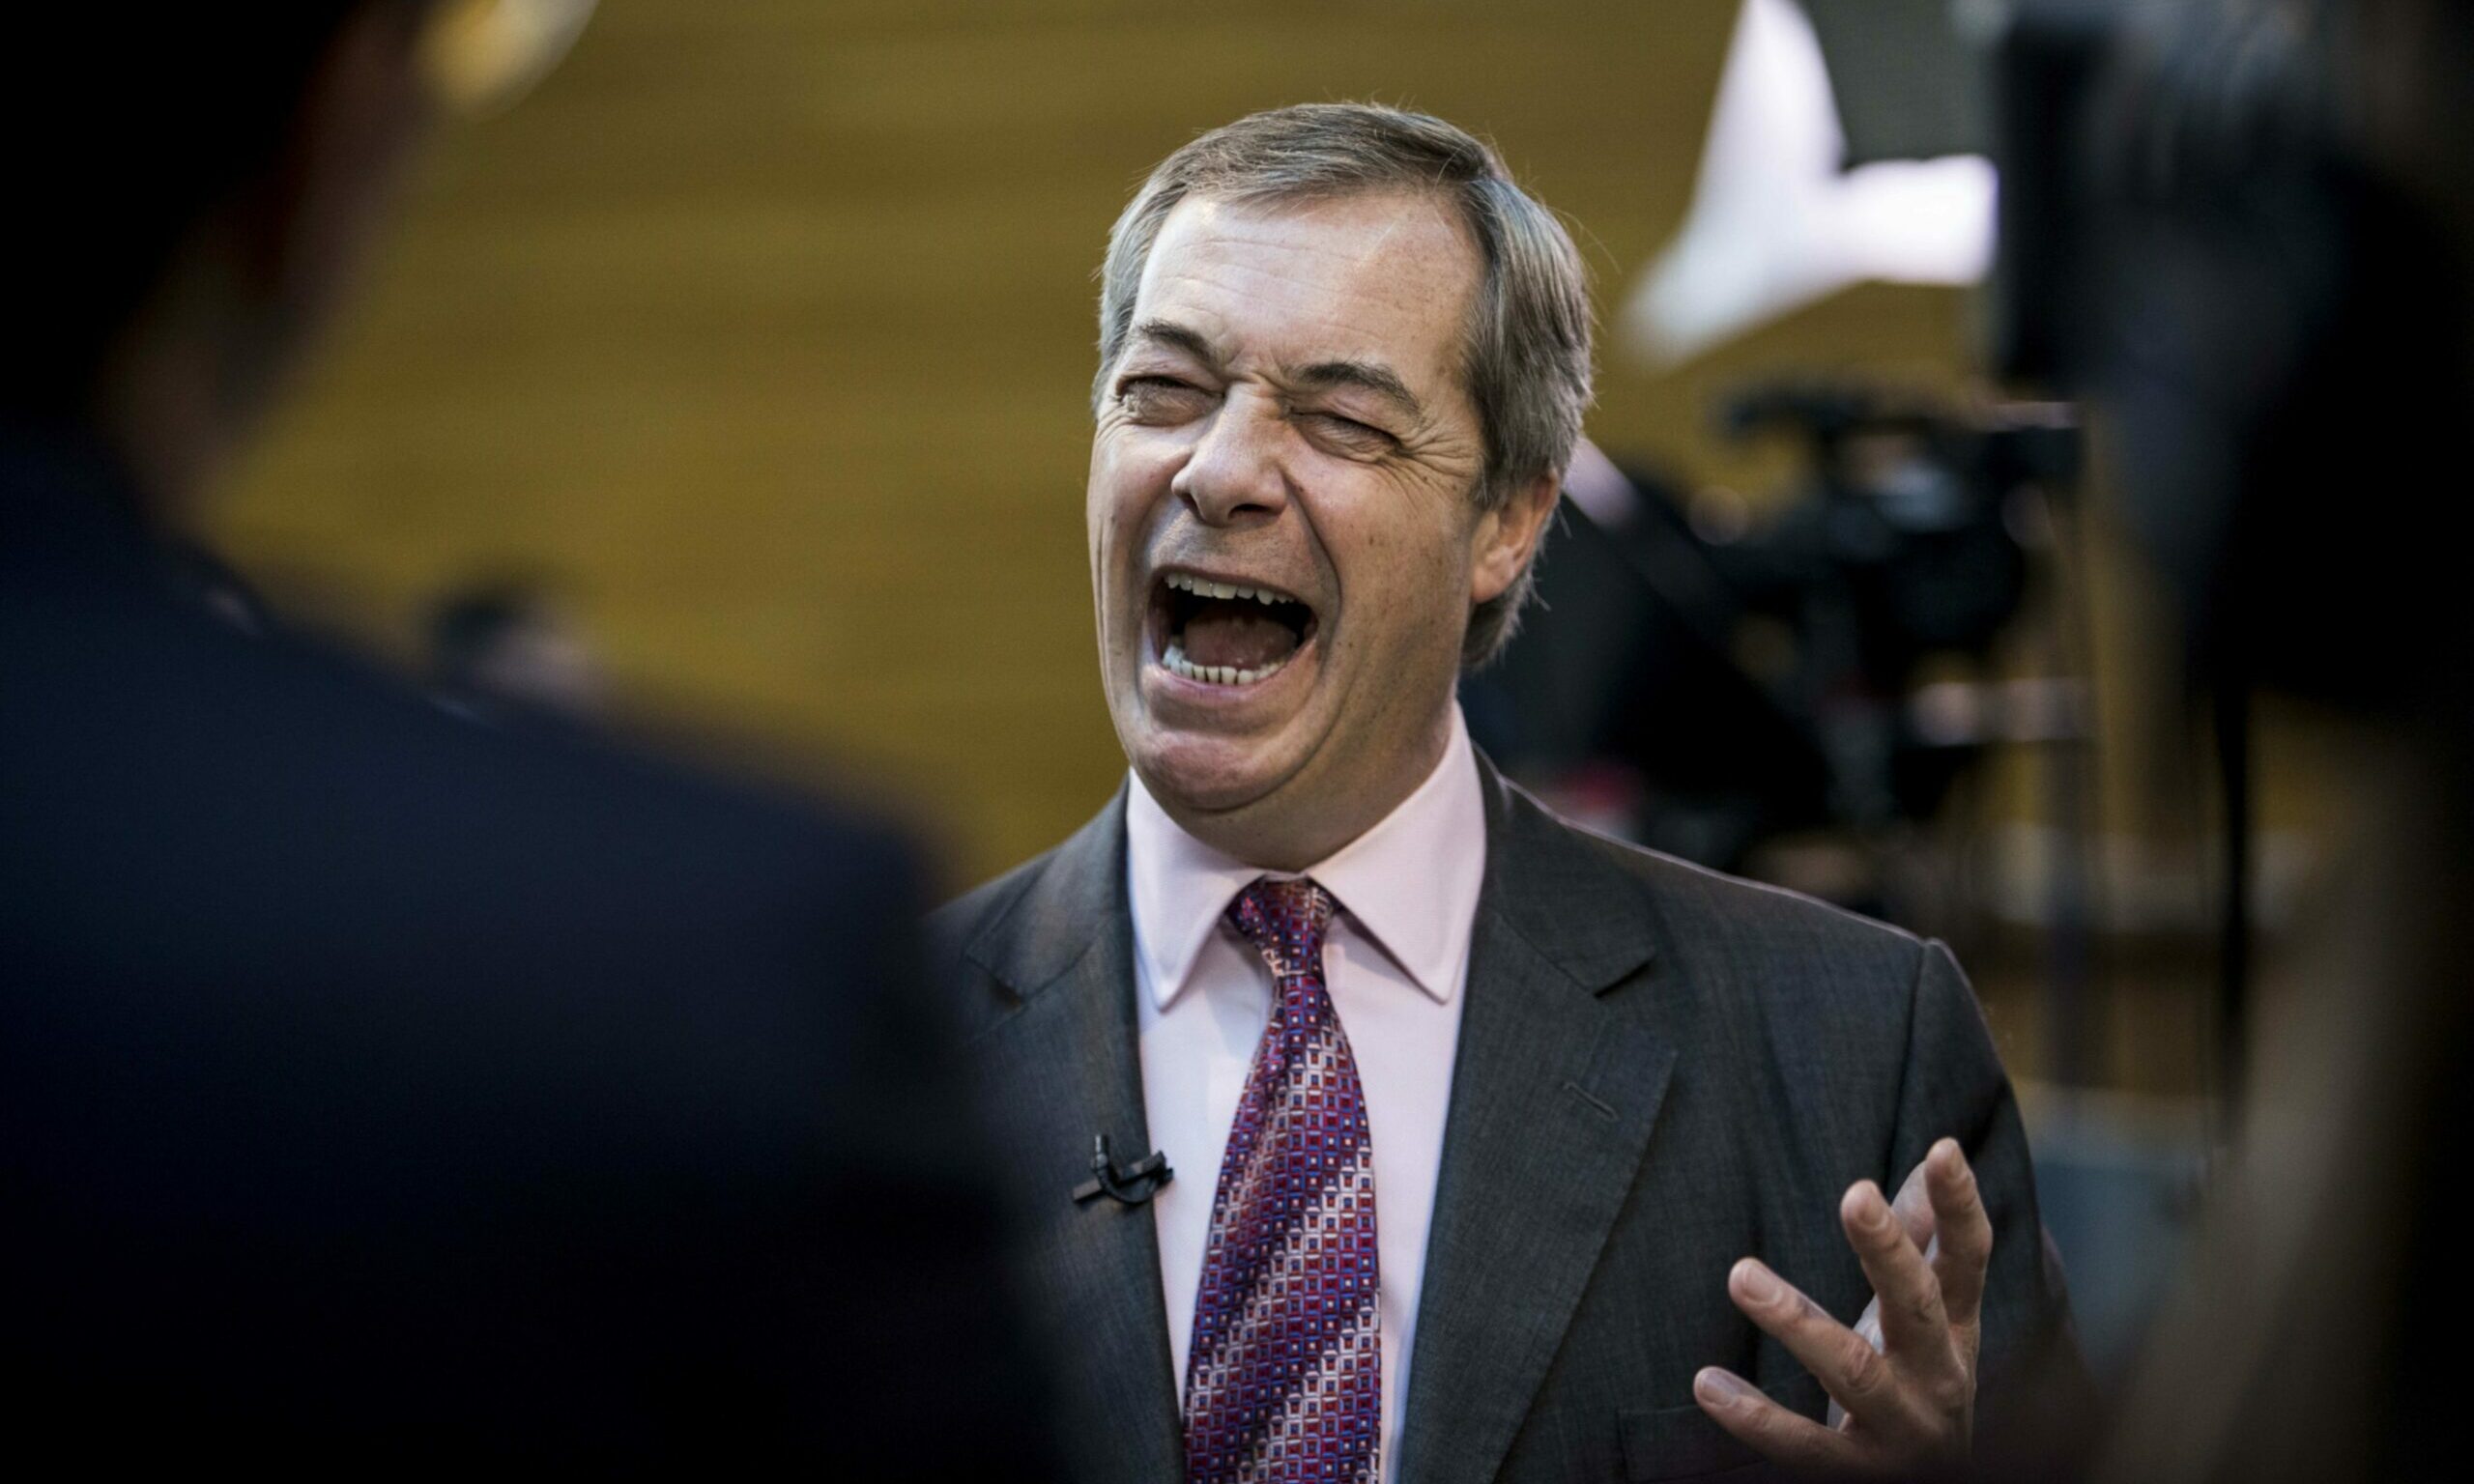 Nigel Farage is back on his soapbox, this time calling for a referendum on the net zero policy (Photo: Elyxandro Cegarra/Zuma Wire/Shutterstock)